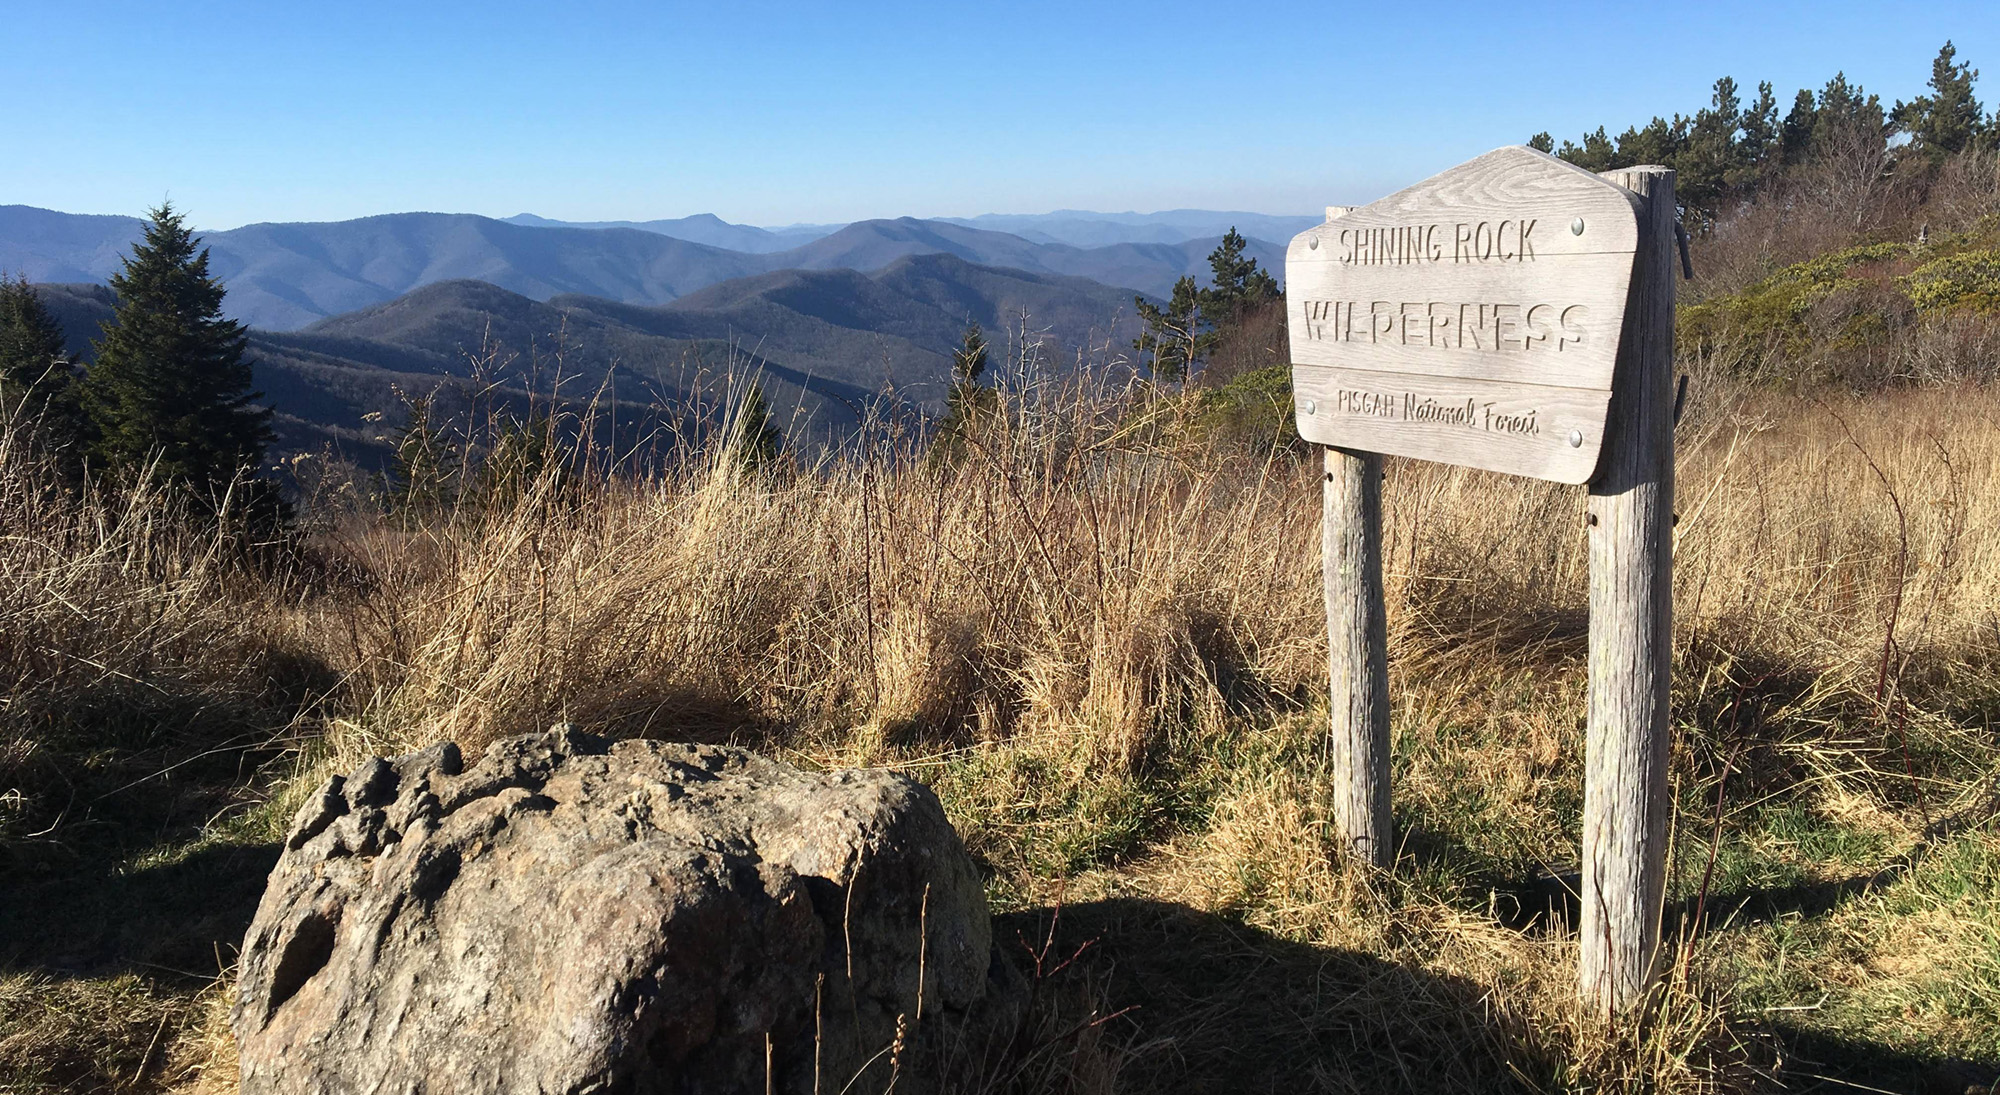 Support Backcountry Recreation in the Nantahala-Pisgah National Forest Management Plan